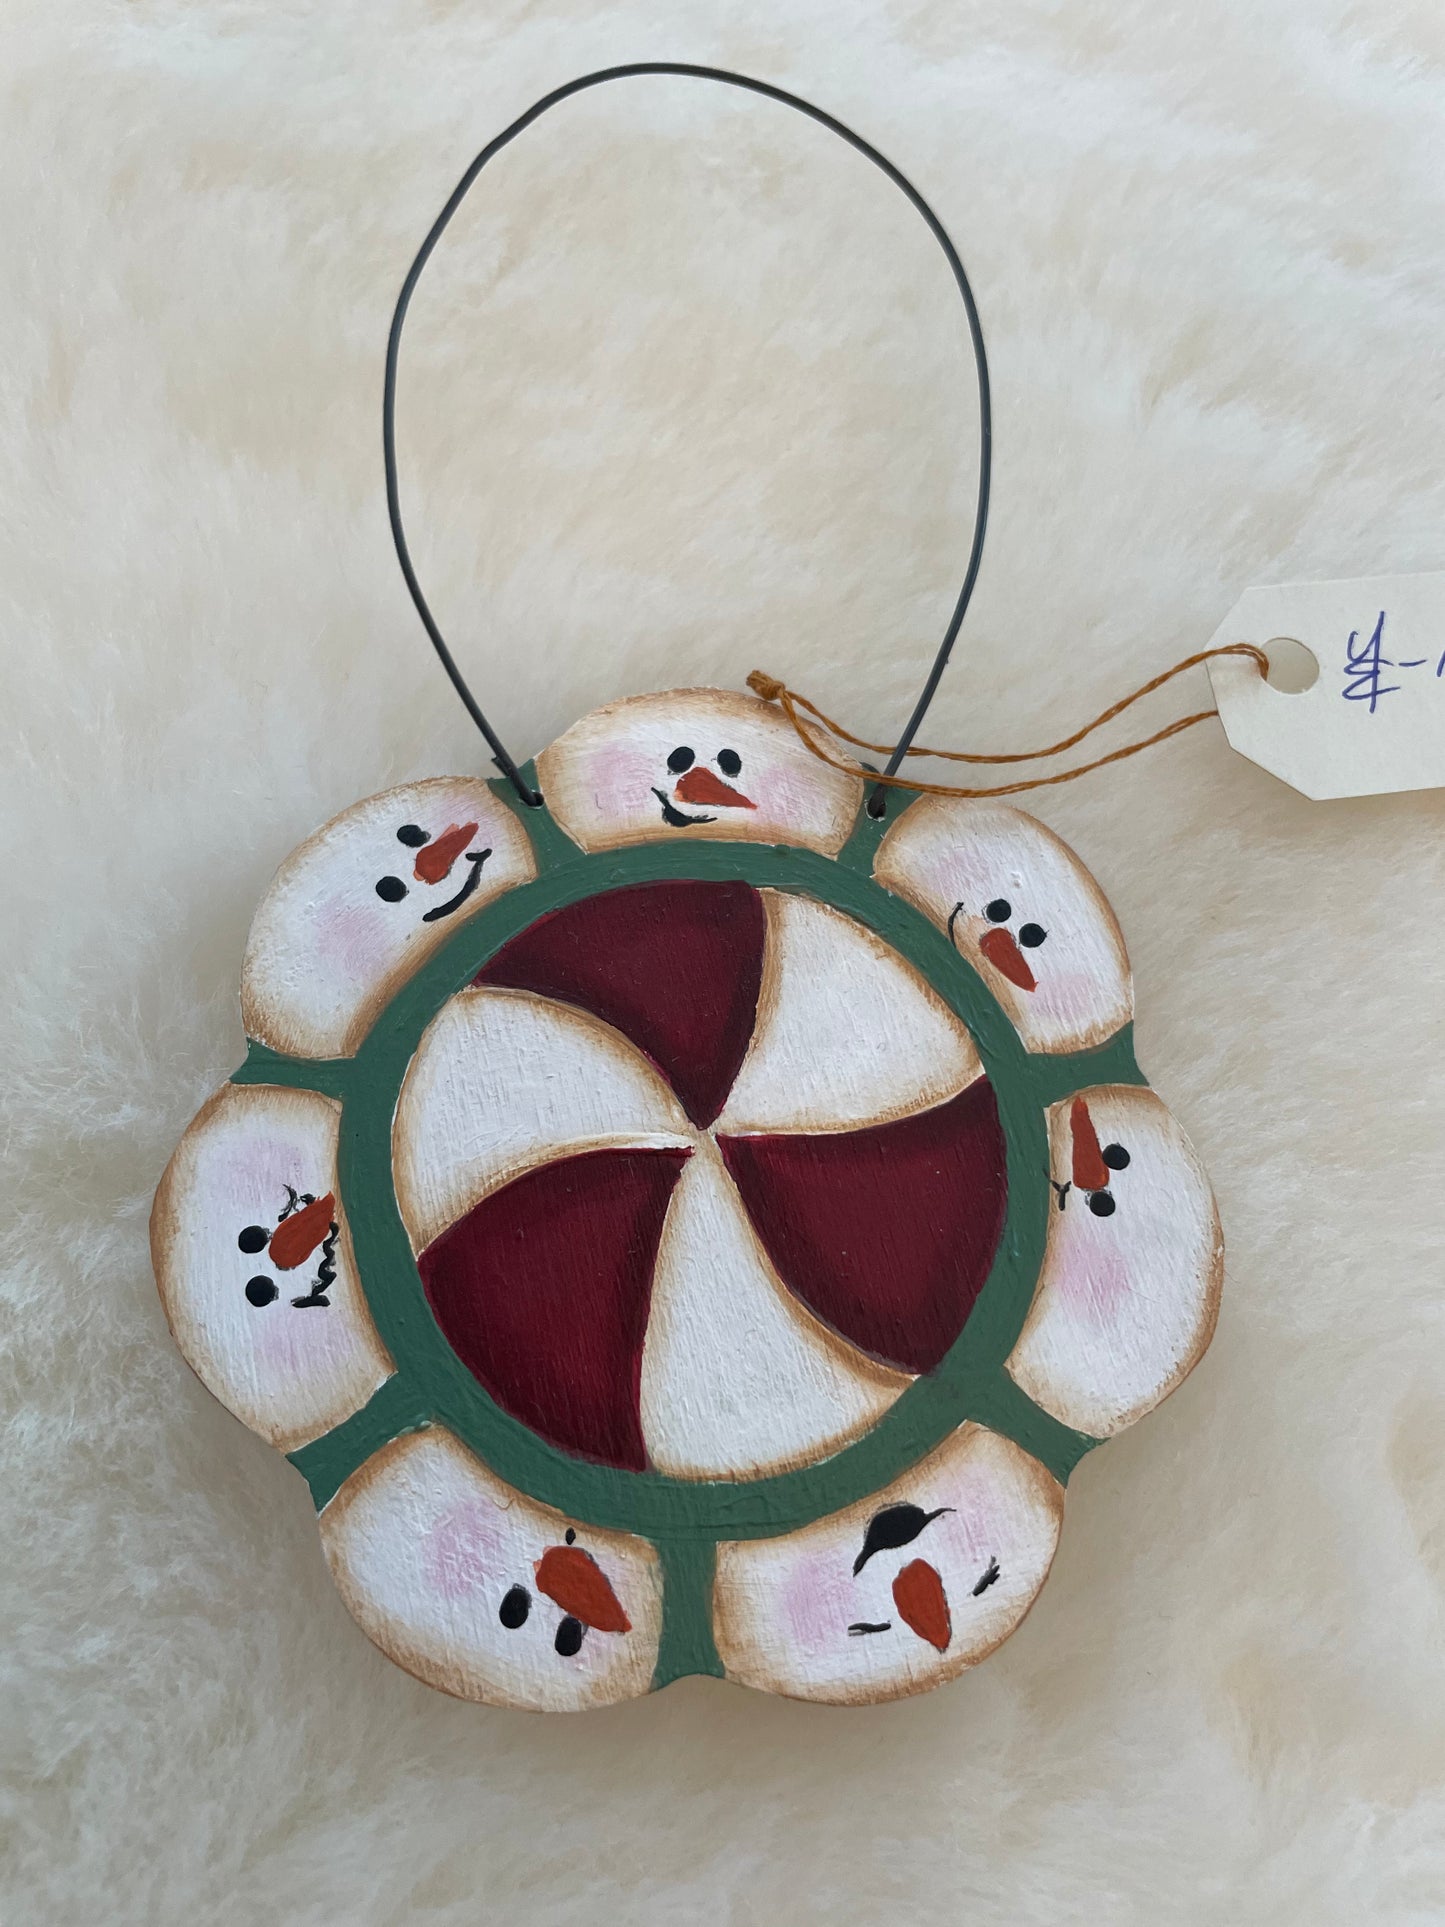 YE-18 Round Snowman Ornament - Wooden hand painted